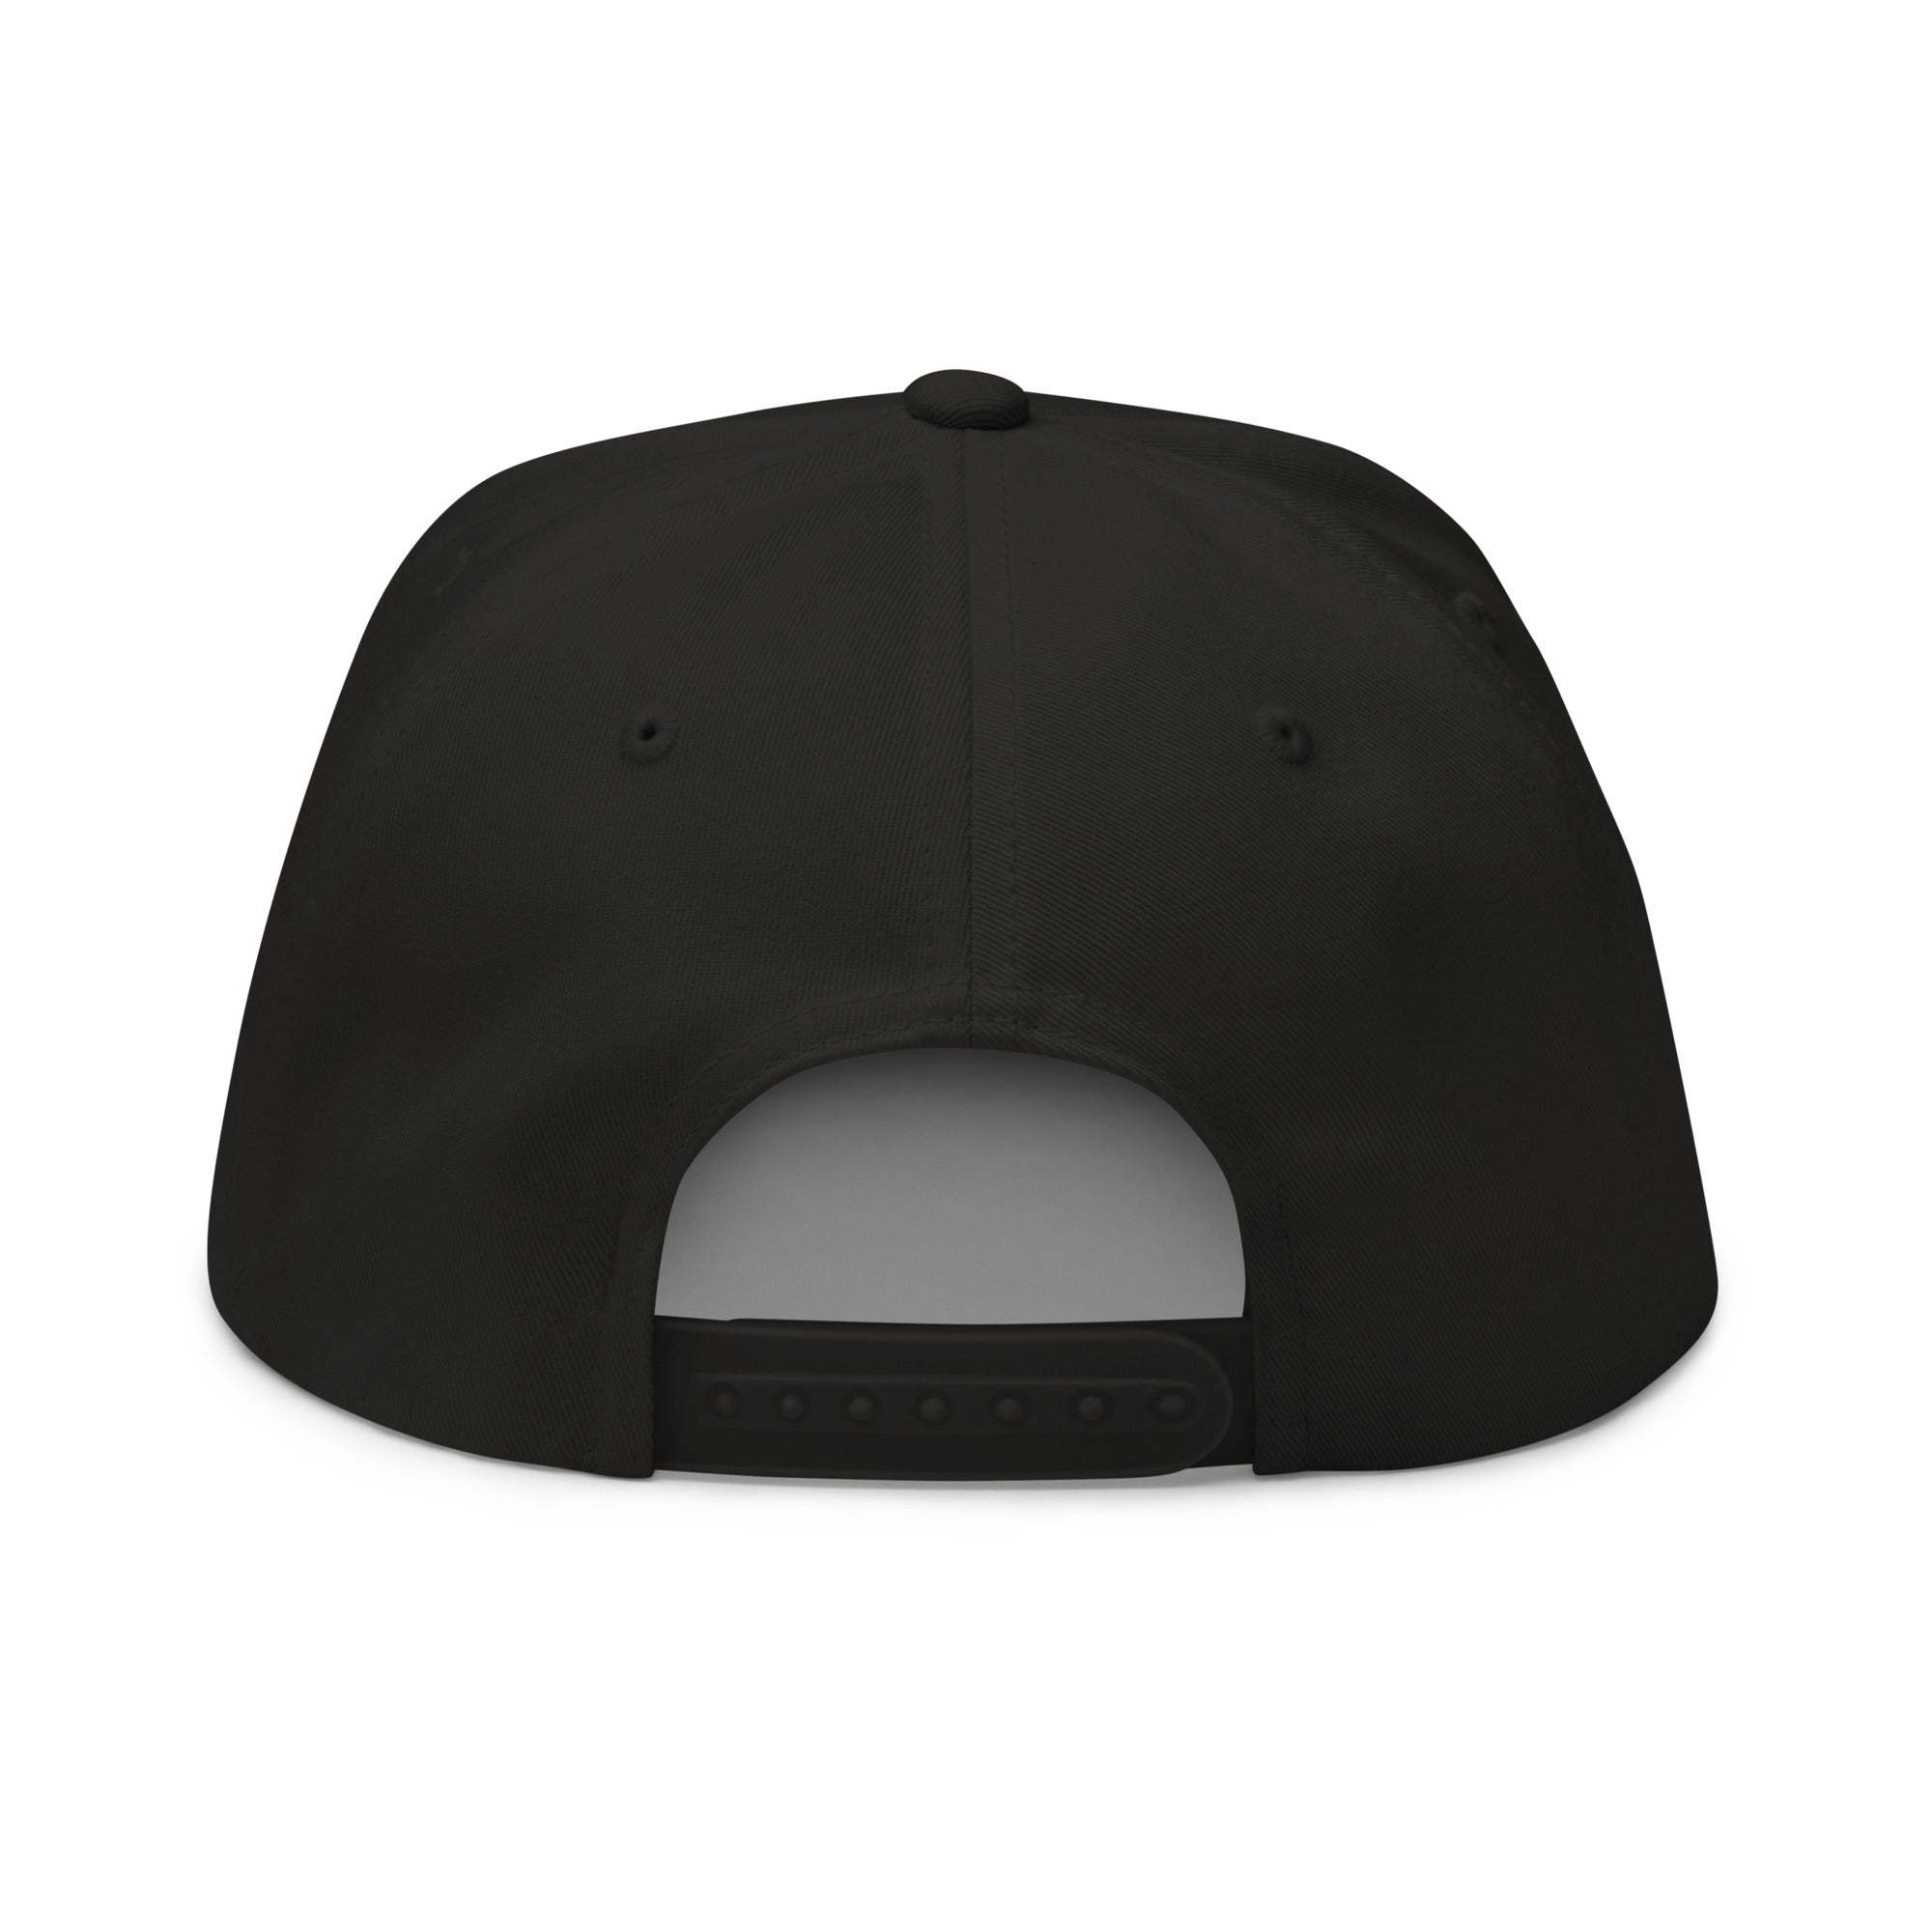 Stand Out with Filly Style: Flat Bill Cap for Trendy Edge